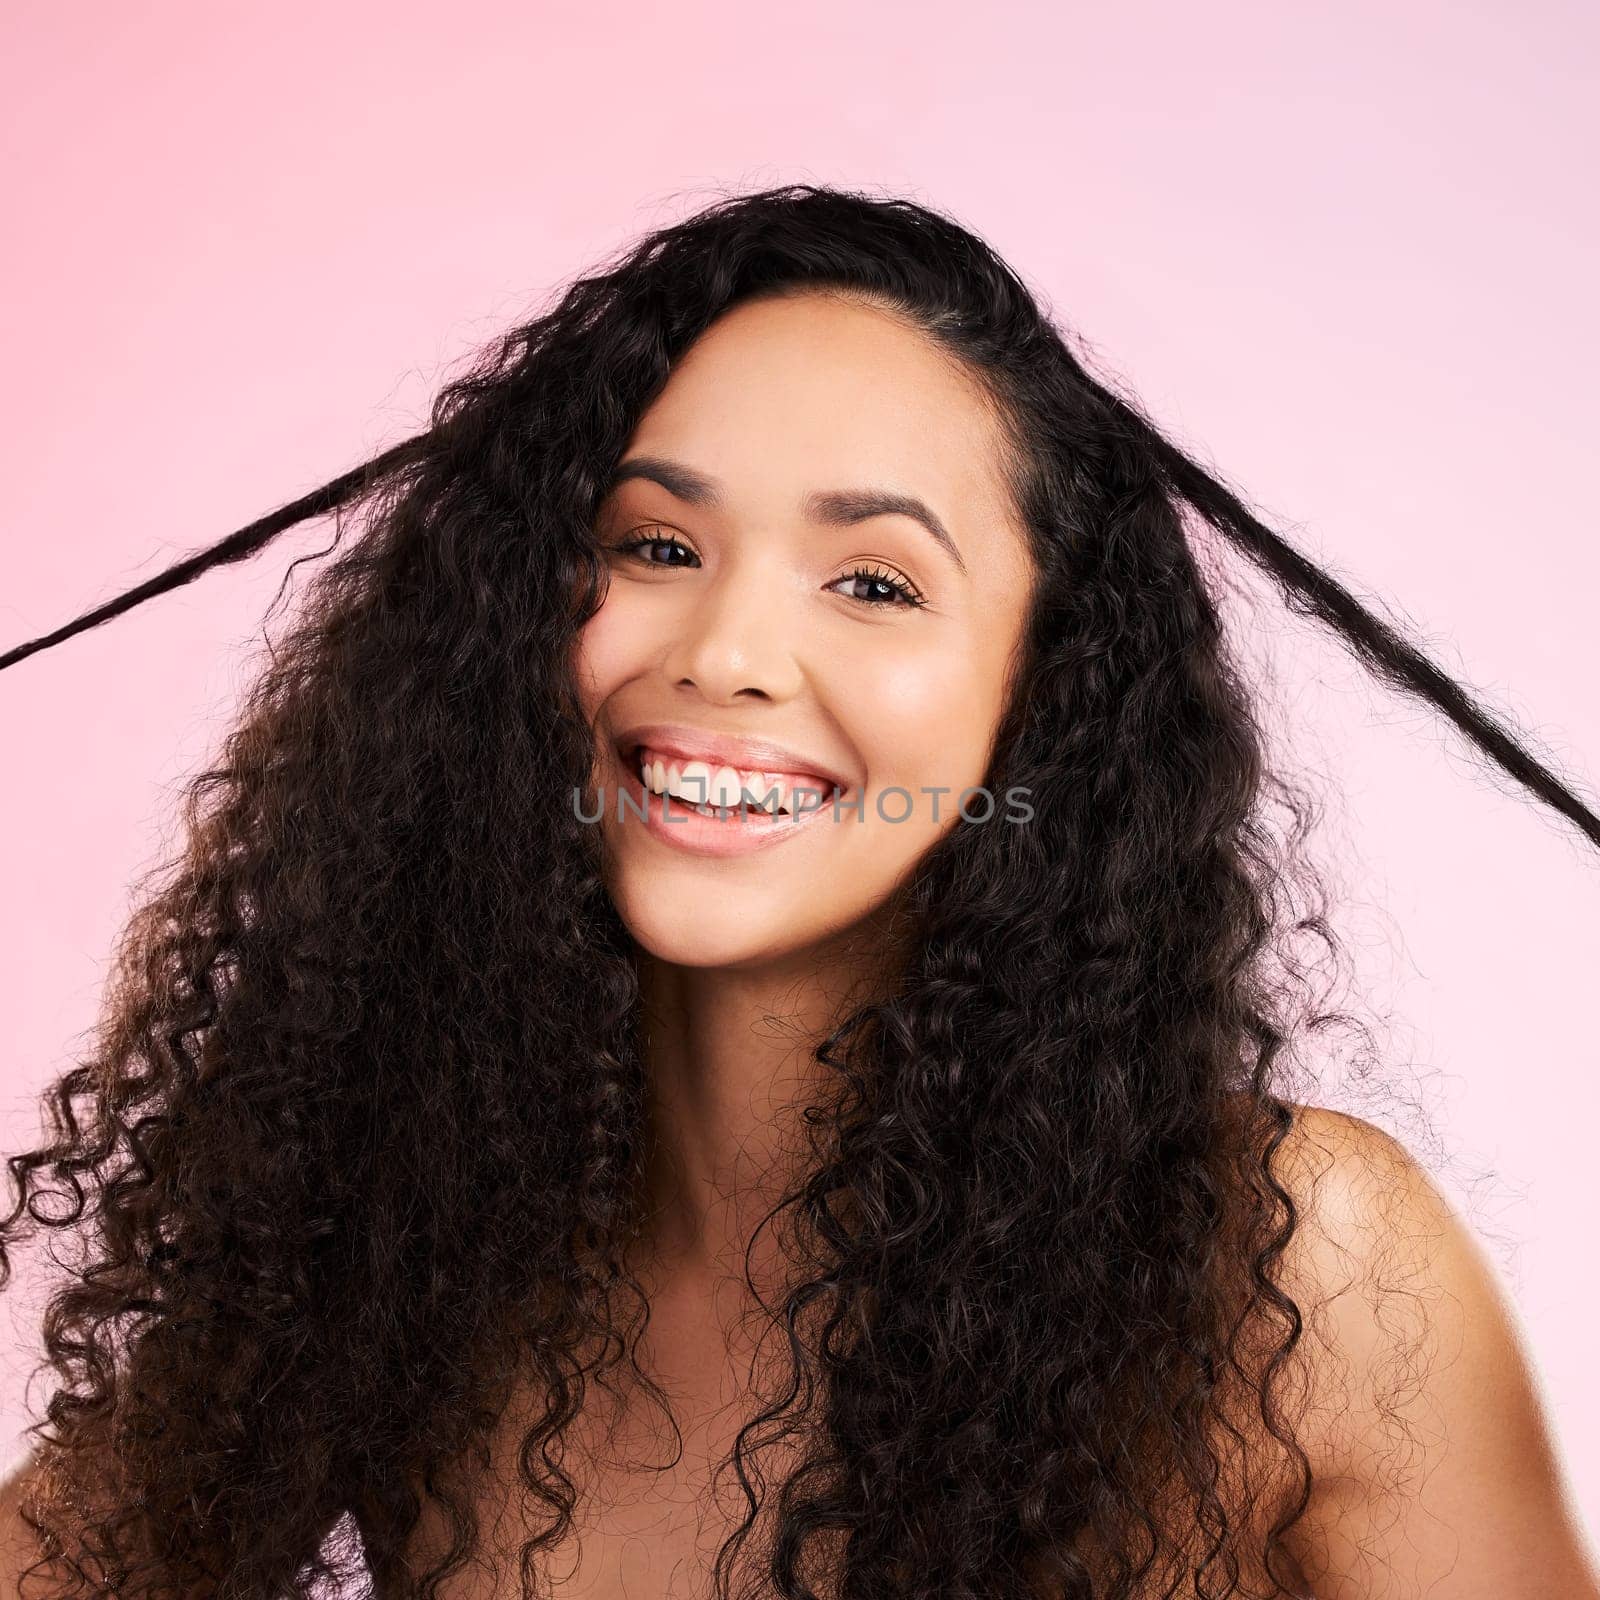 Face, woman and curly hair pull for beauty in studio isolated on a pink background. Portrait, natural cosmetics and hairstyle of happy model in salon treatment for growth, wellness and aesthetic by YuriArcurs